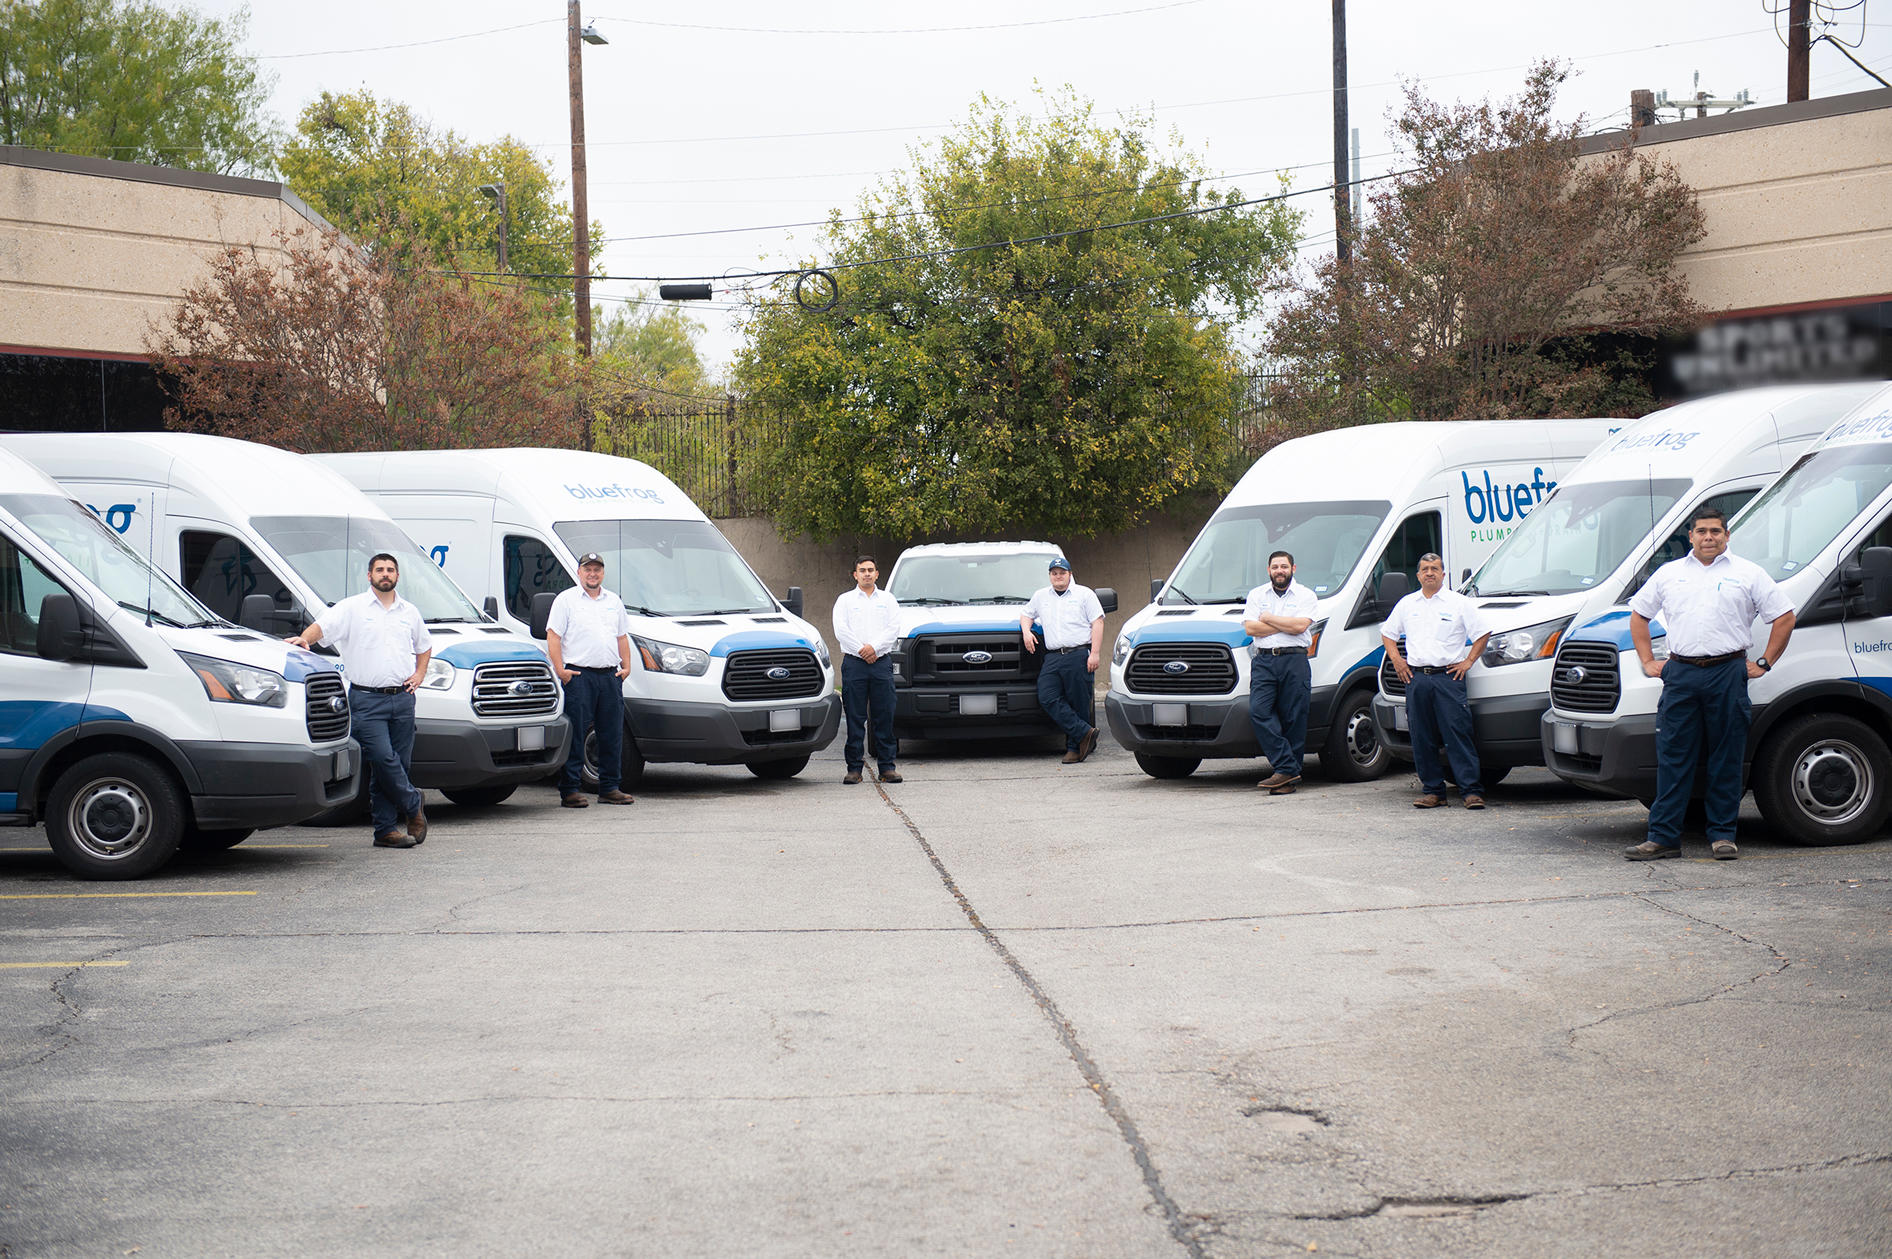 bluefrog Plumbing + Drain of West Houston company vehicle fleet ready for service calls all over the West Houston area.